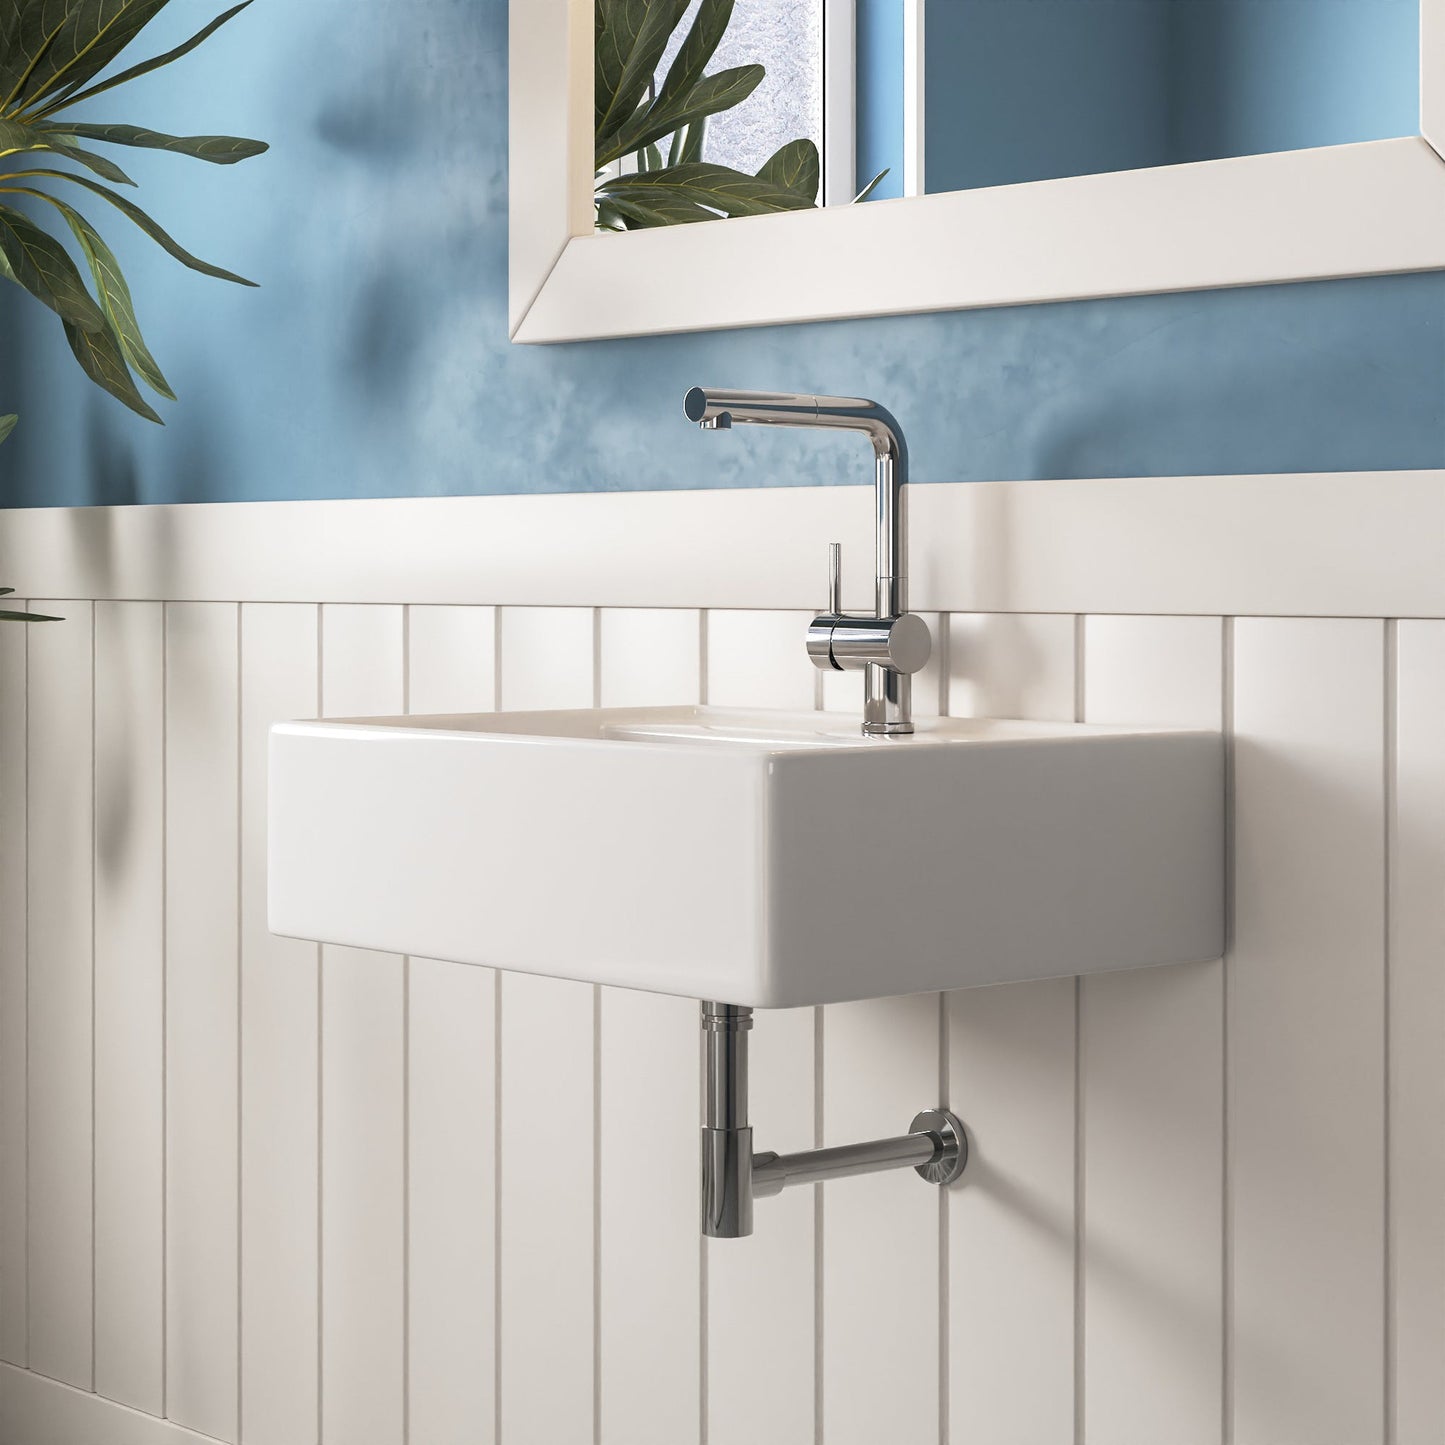 DeerValley 23" Rectangular White Wall-Mounted Bathroom Sink With Overflow Hole